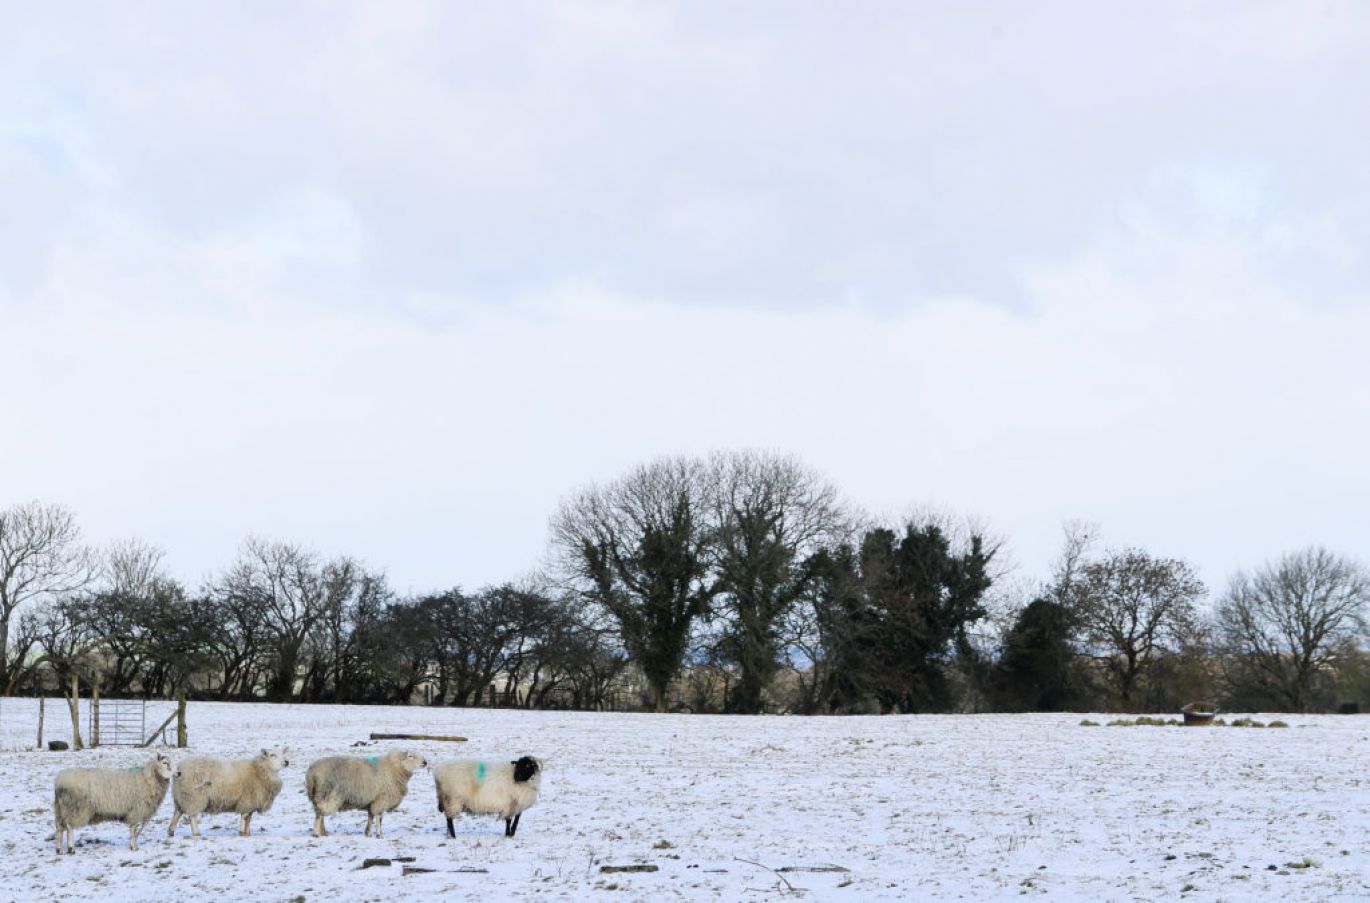 Sheep In A Snow-Covered Field In Co Kildare. Photo: Pa Images.